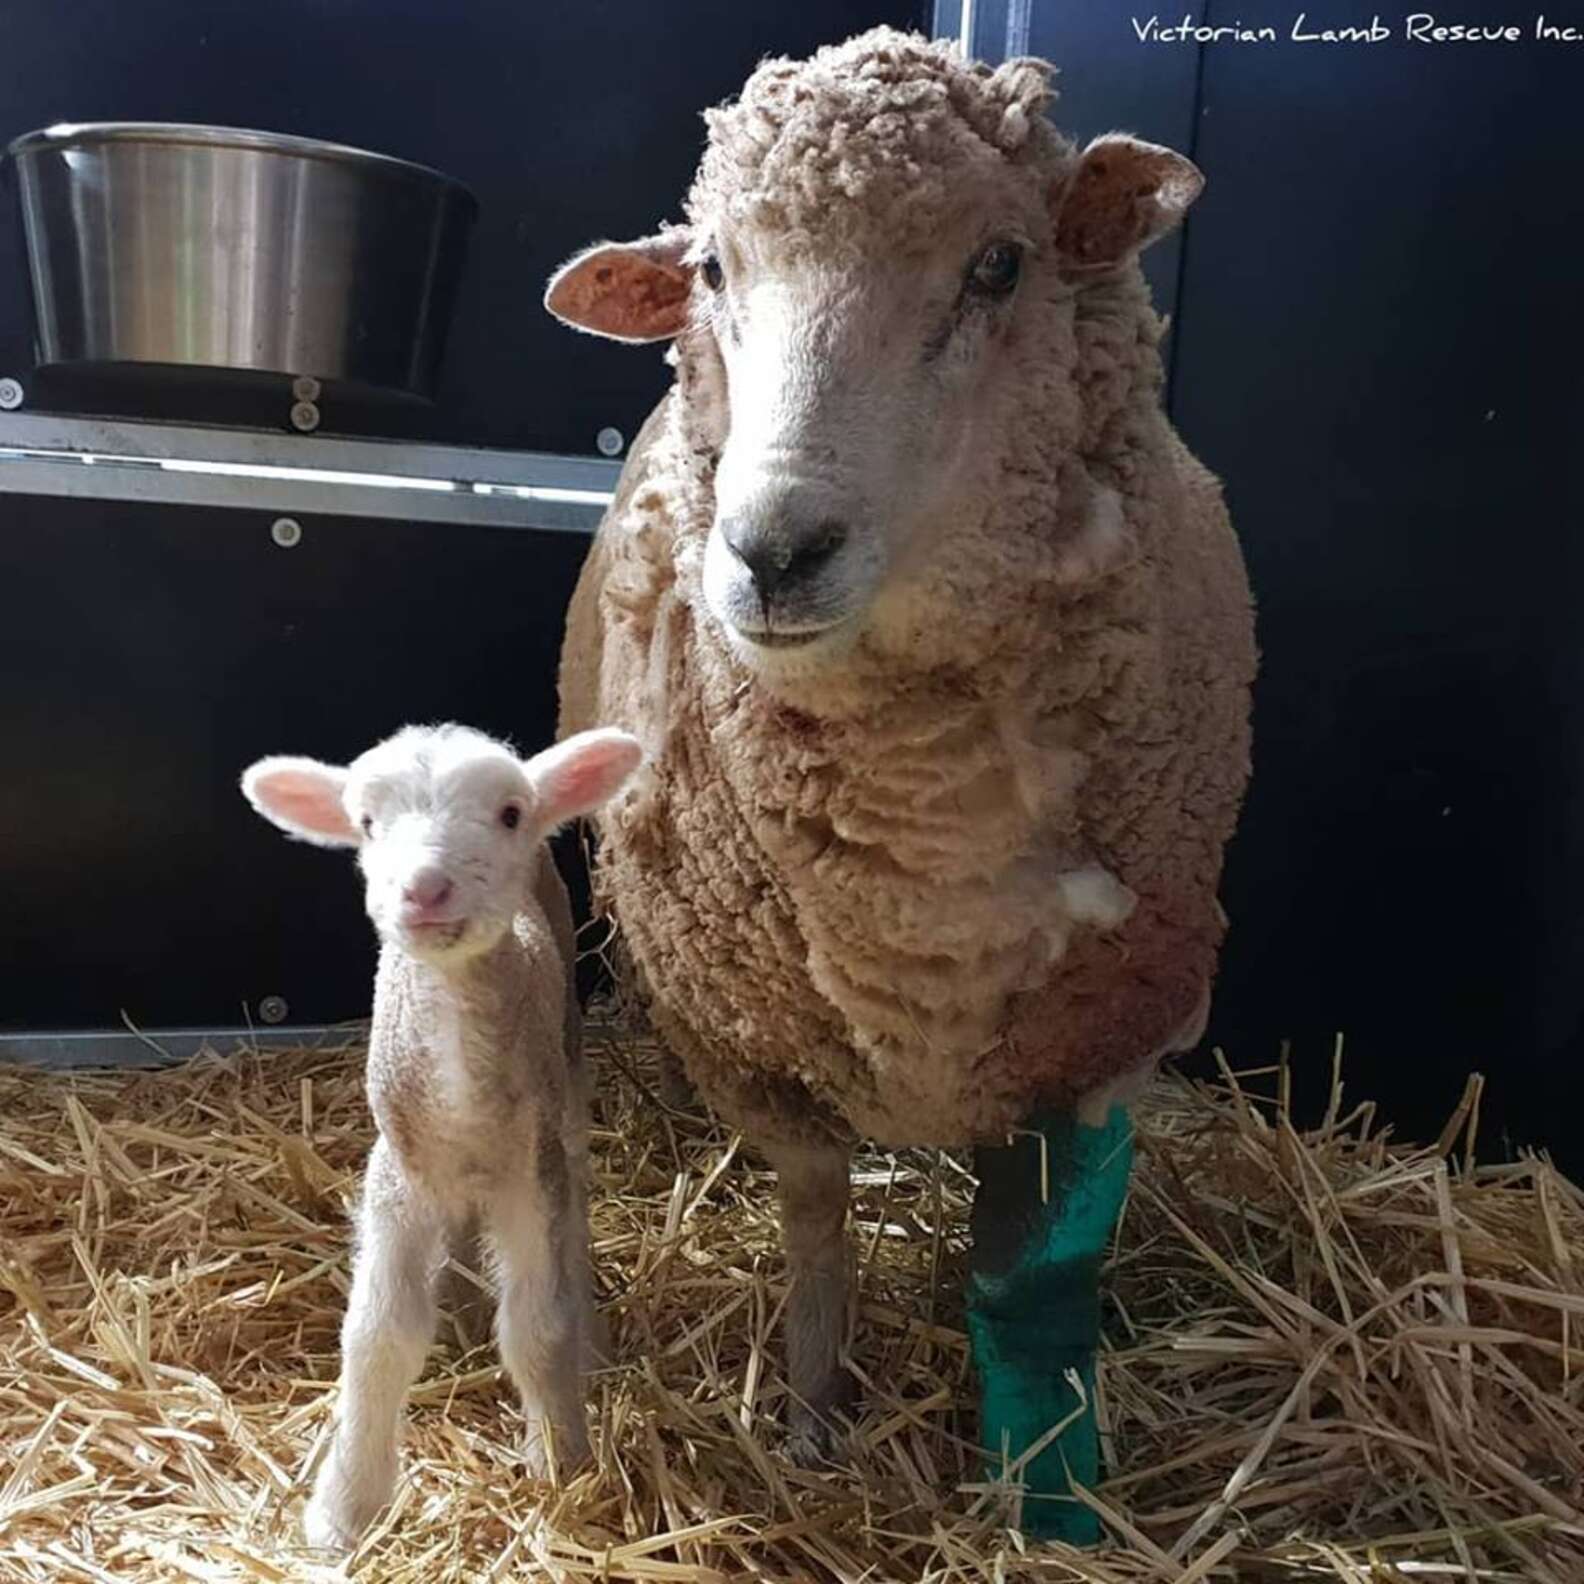 Sheep Fought Off Hungry Attackers To Save Her Baby - The Dodo